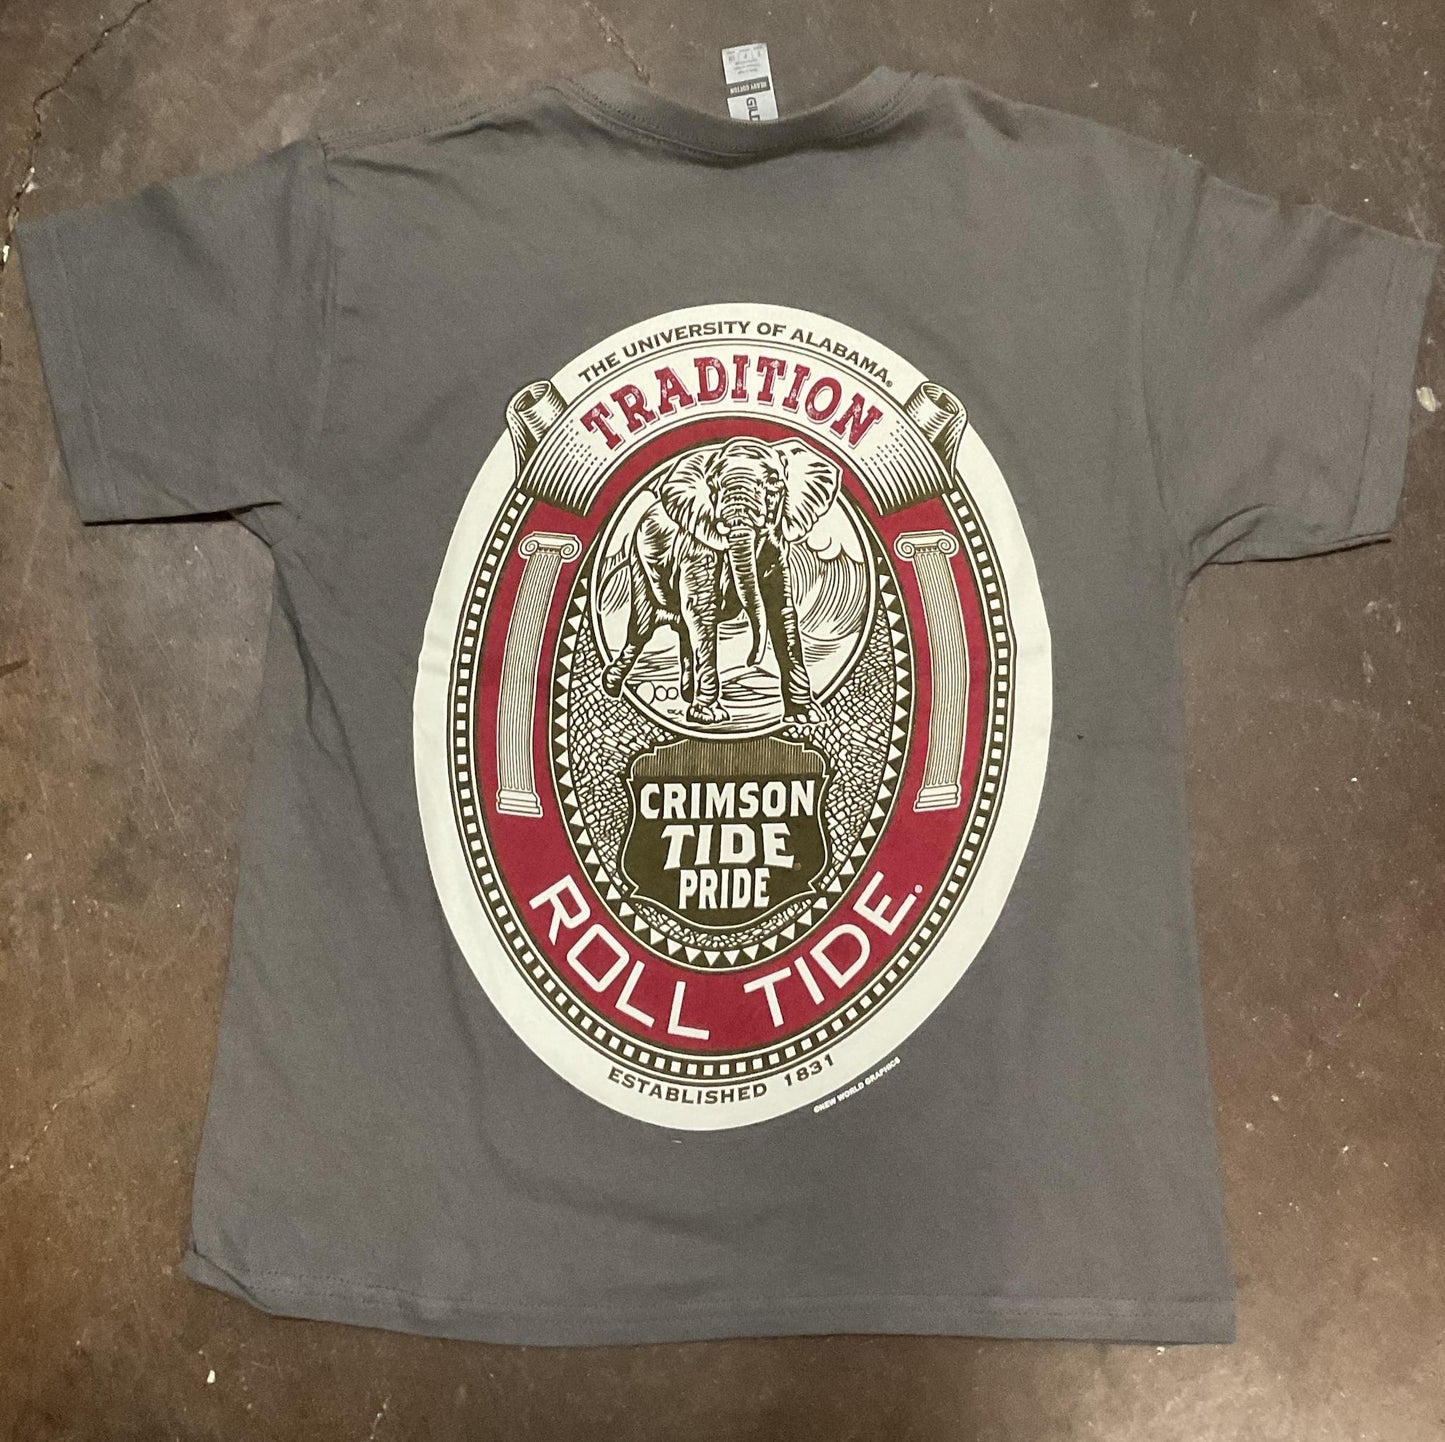 New World Graphics Alabama Inset Oval Youth Tee